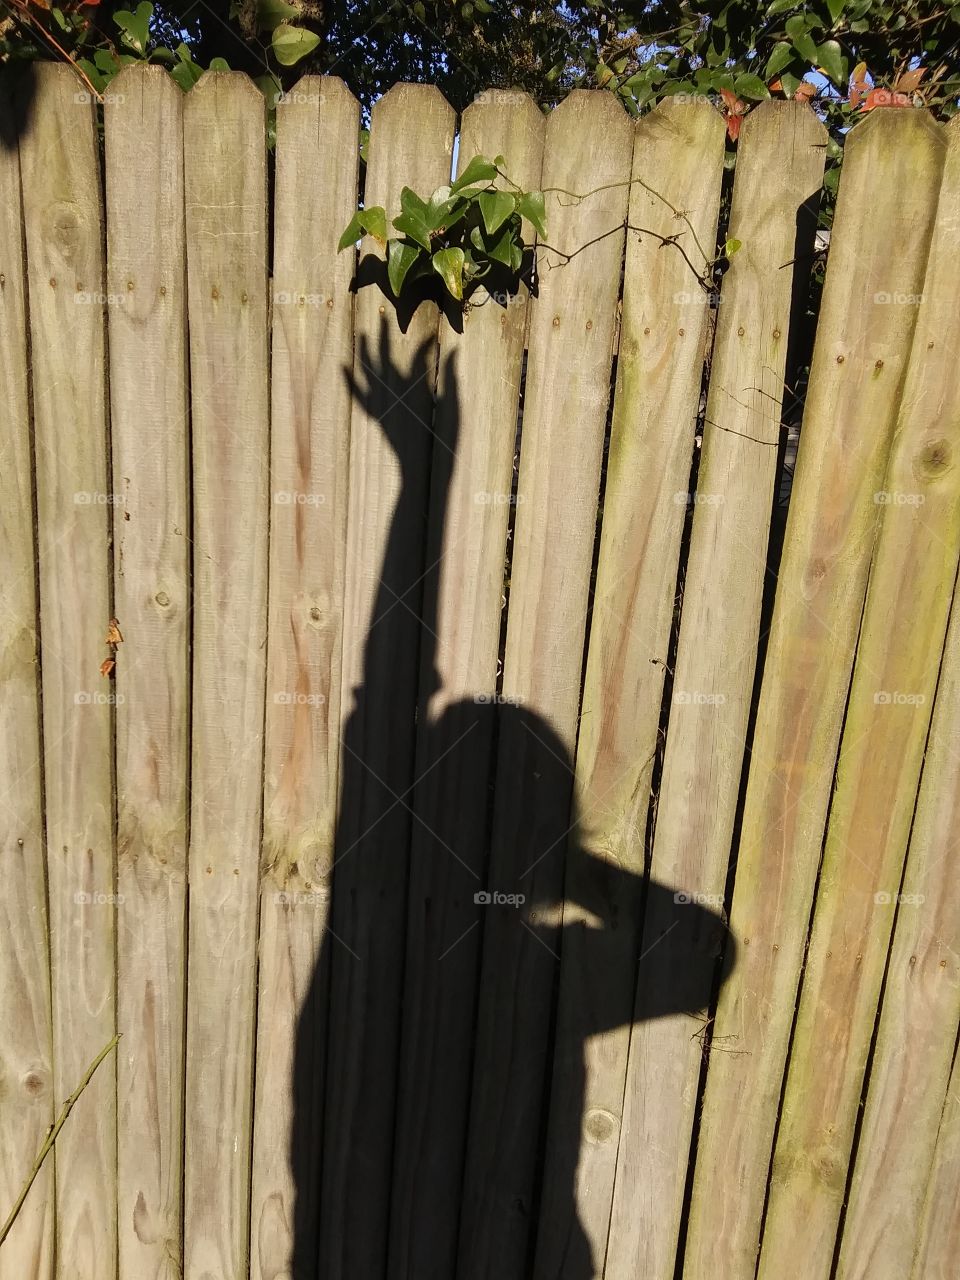 shadow on the fence